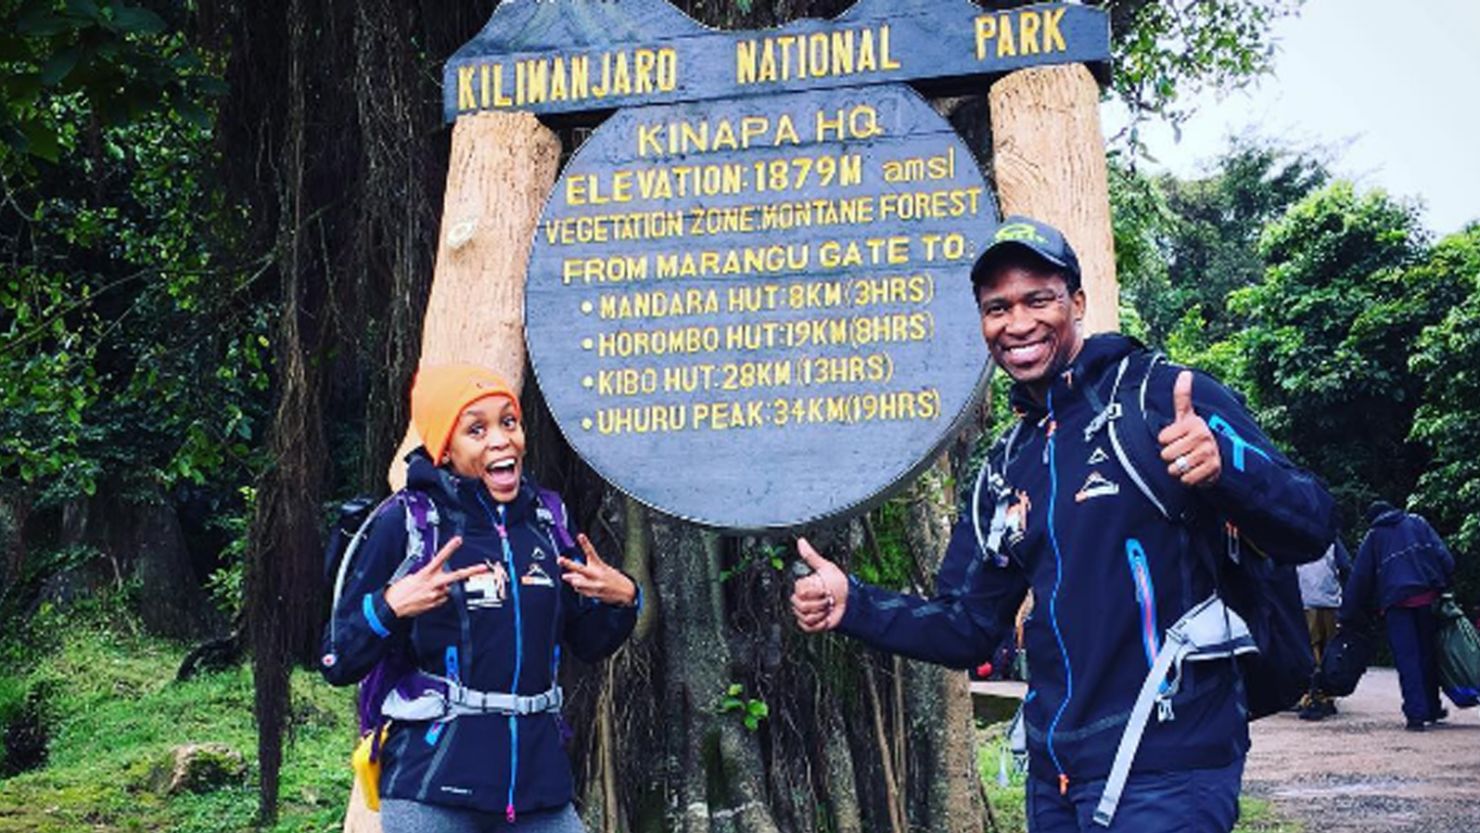 Gugu Zulu and his wife Letshego pictured at the start of their trek up Mount Kilimanjaro.